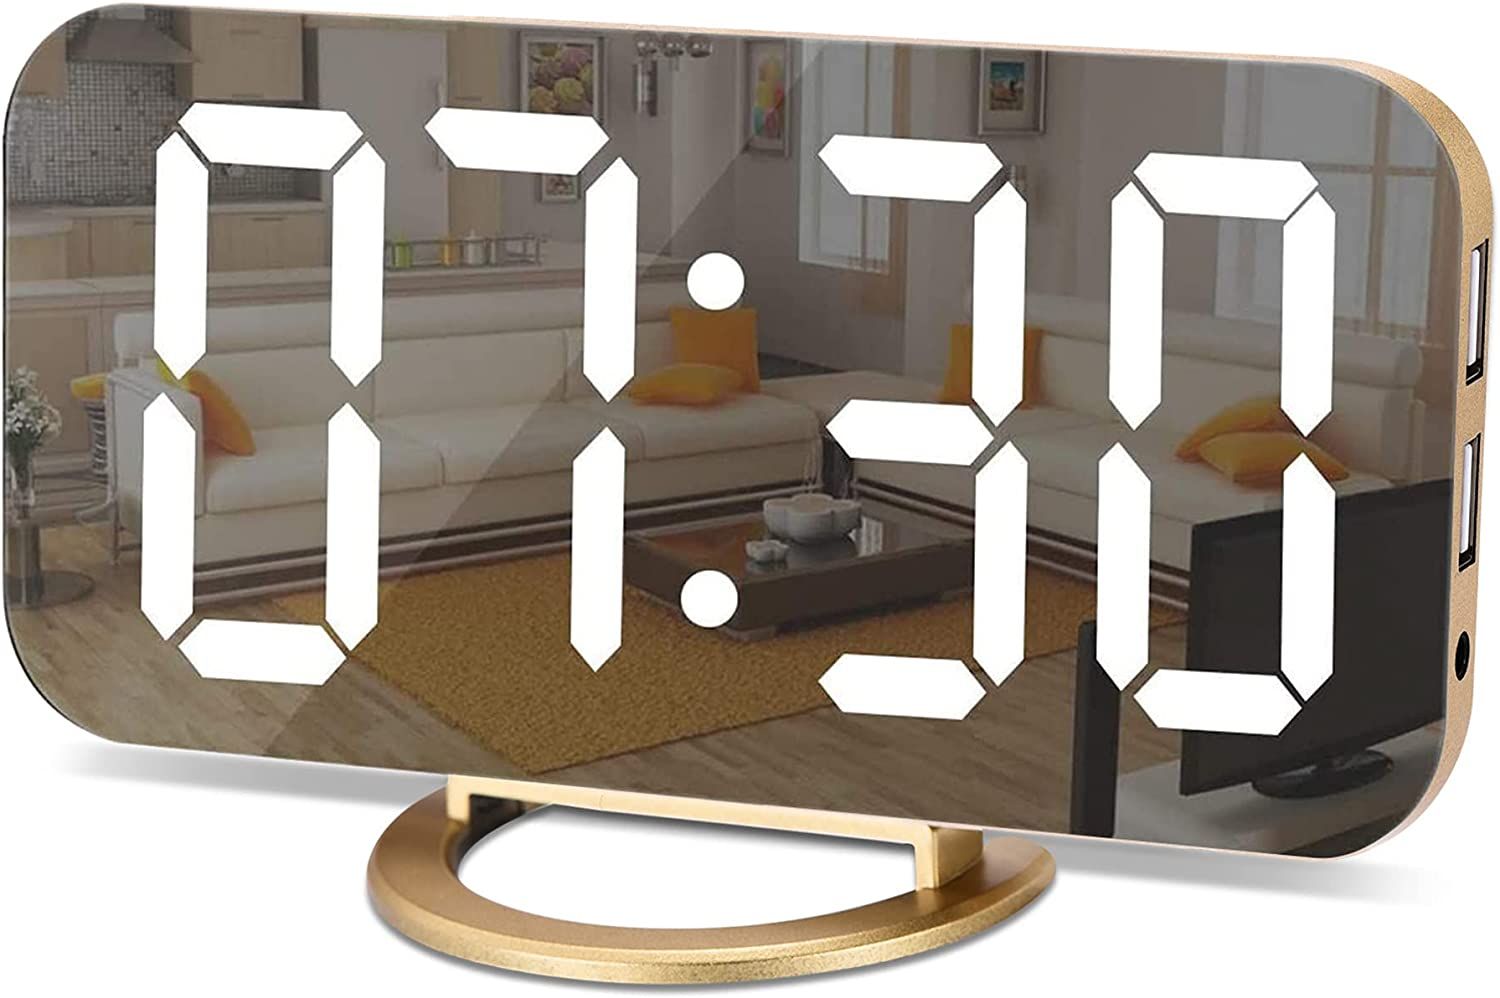 Digital Alarm Clock,LED and Mirror Desk Clock Large Display,with Dual USB Charger Ports,3 Levels ... | Amazon (US)